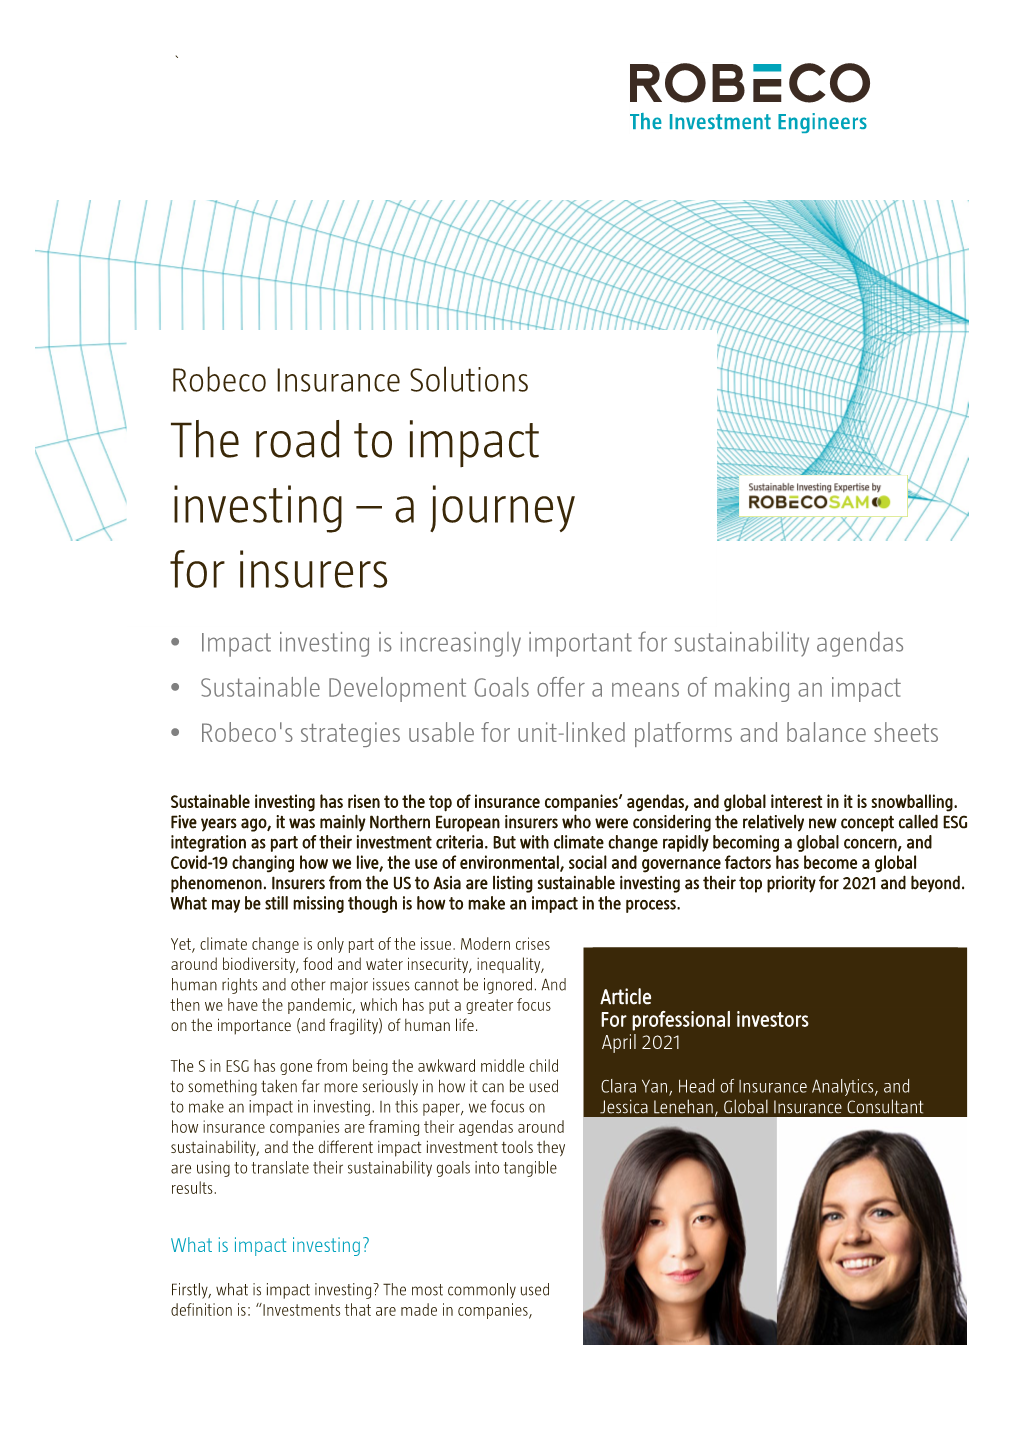 The Road to Impact Investing – a Journey for Insurers